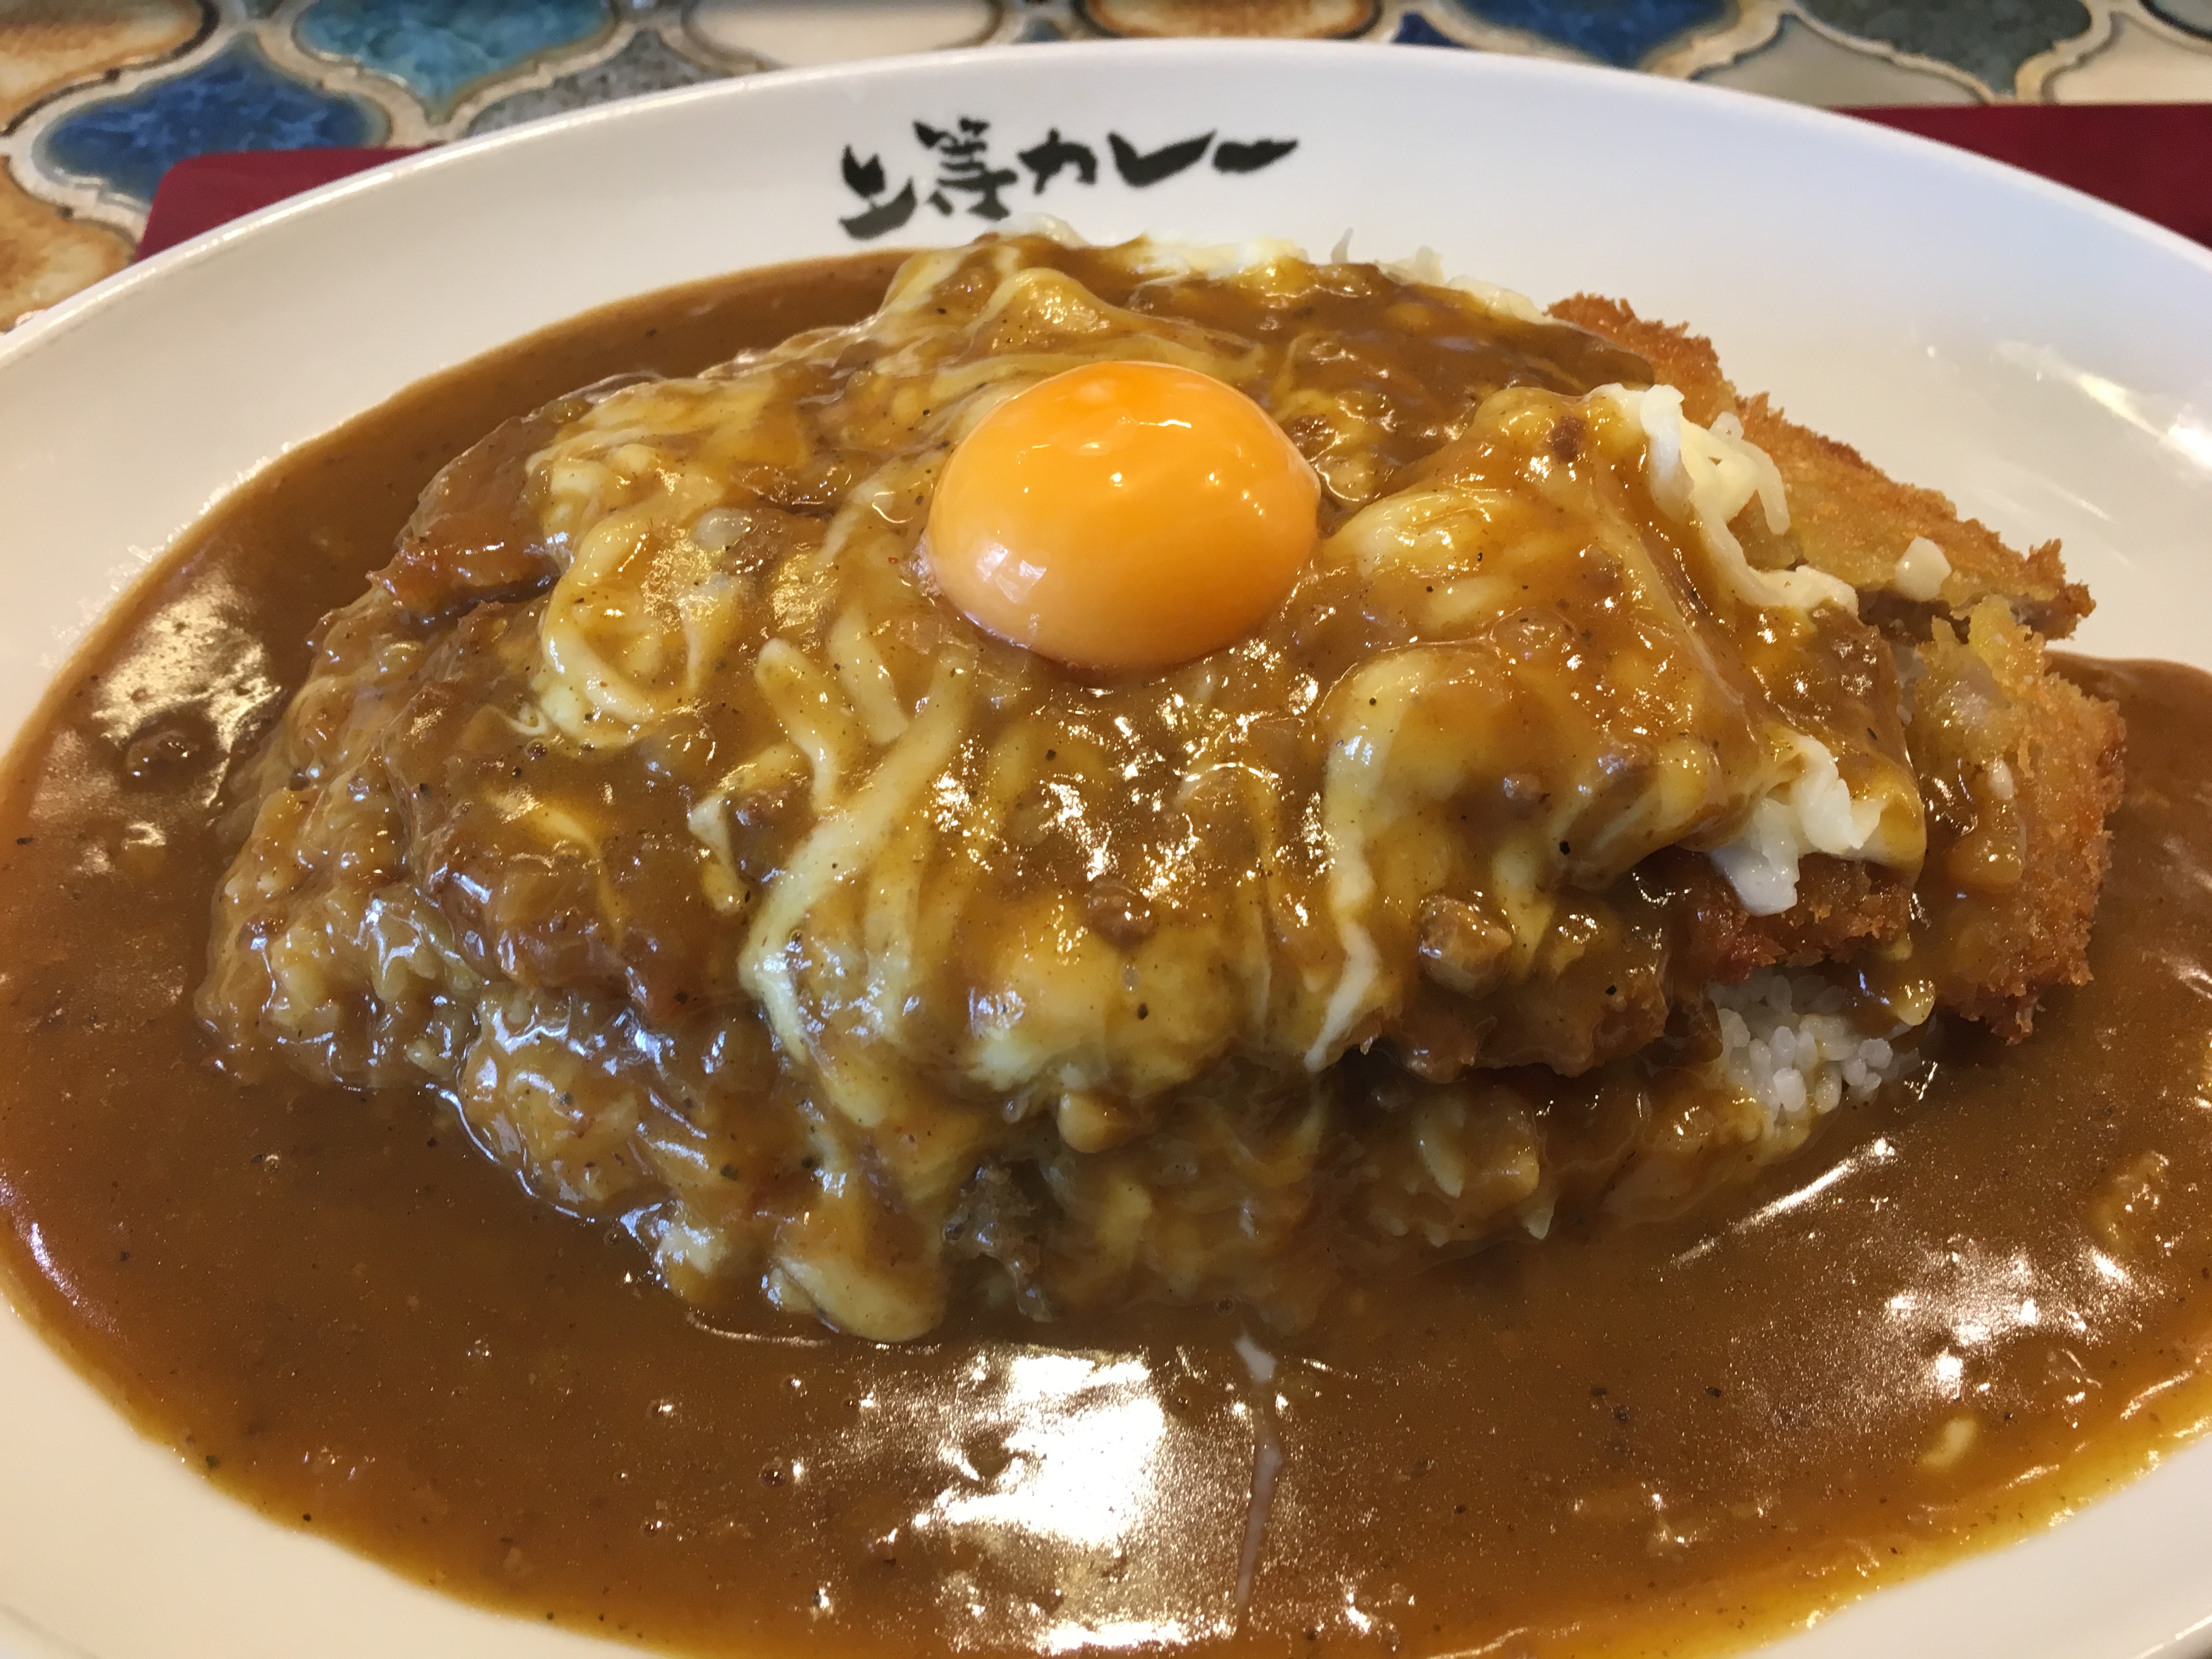 We tried 8 kinds of Japanese curry bricks. Here are the best ones